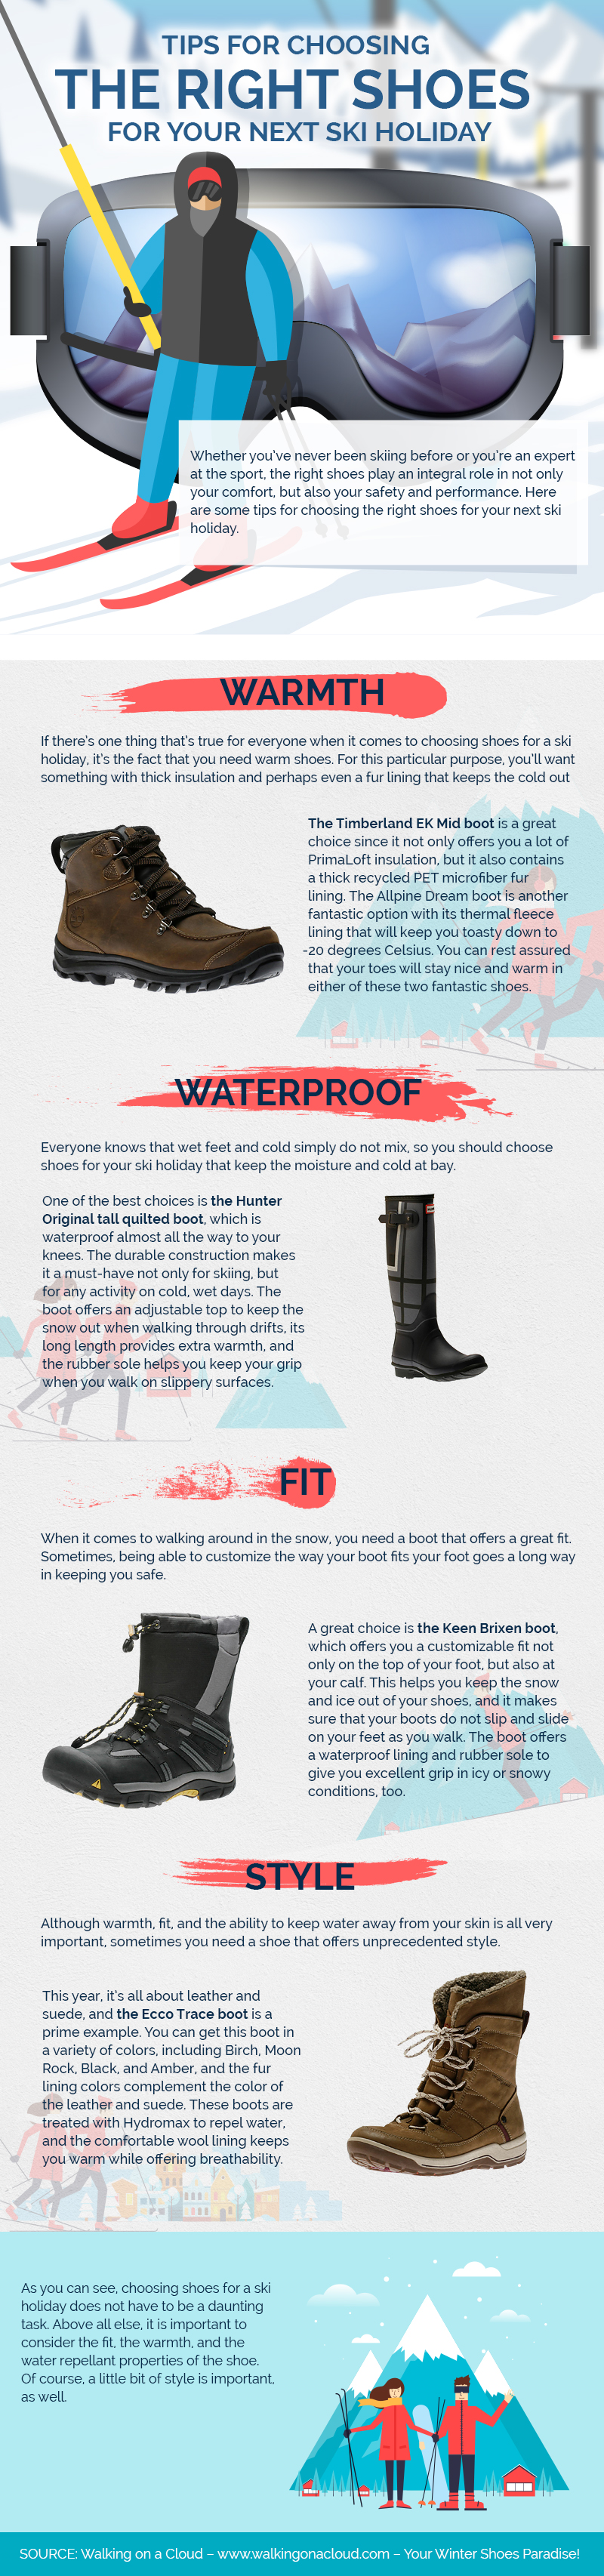 Tips-for-Choosing-the-Right-Shoes-for-Your-Next-Ski-Holiday